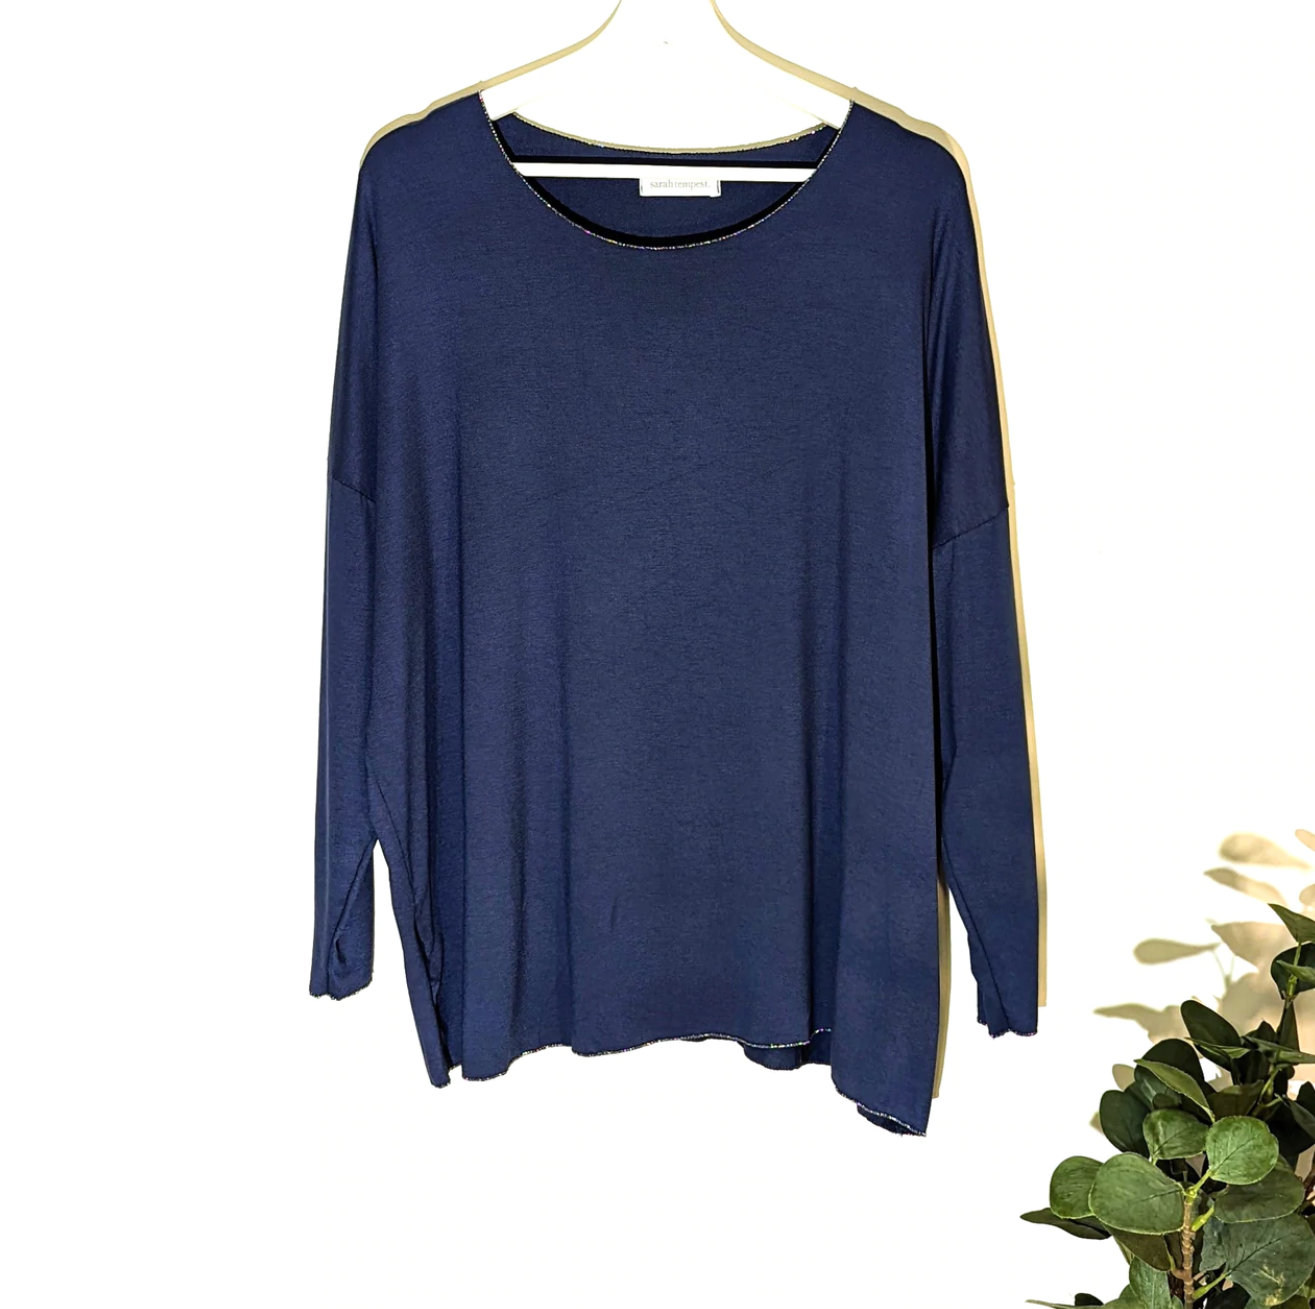 dark blue super soft long sleeve top with silver trim